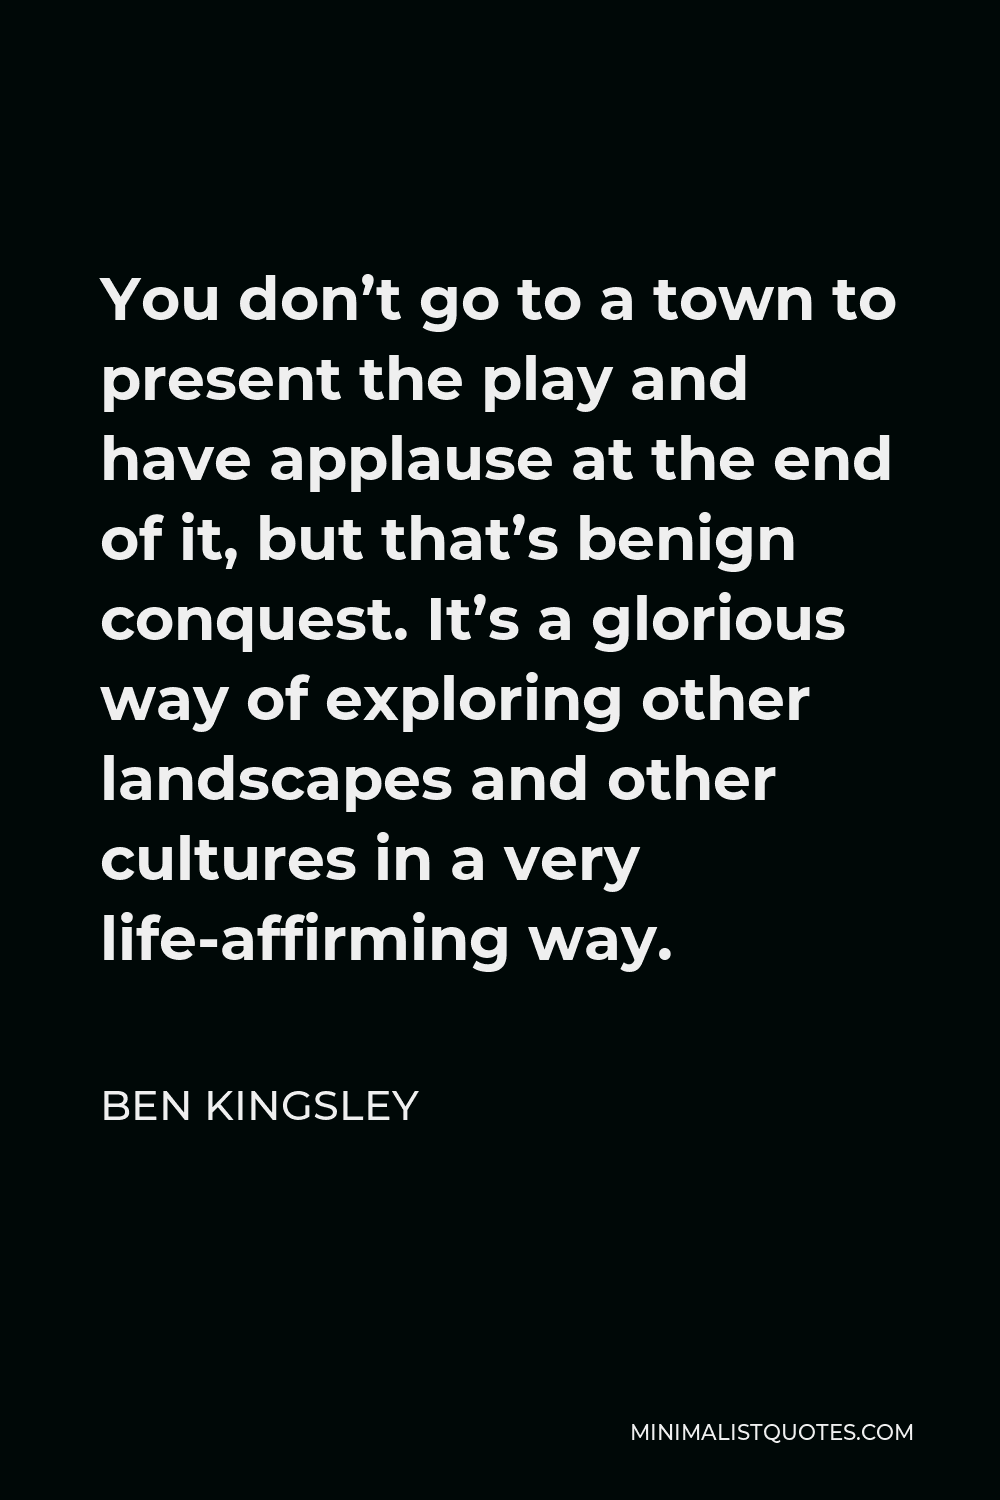 Ben Kingsley Quote - You don’t go to a town to present the play and have applause at the end of it, but that’s benign conquest. It’s a glorious way of exploring other landscapes and other cultures in a very life-affirming way.